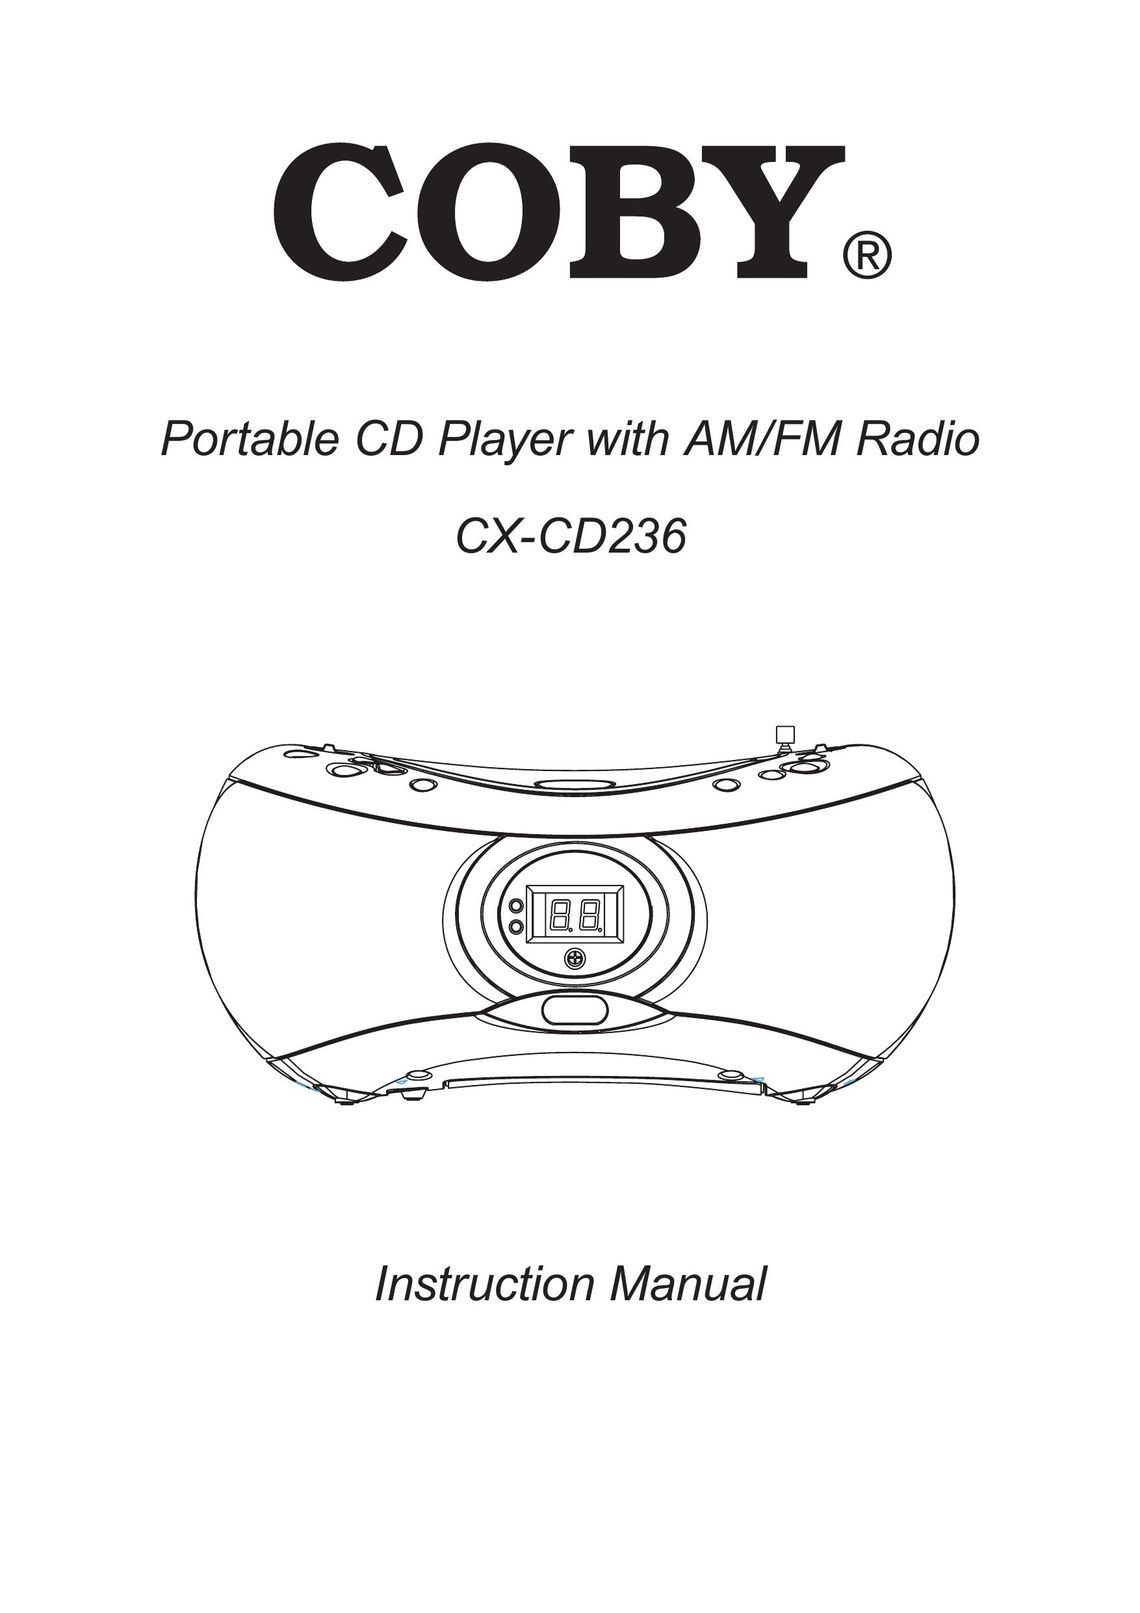 COBY electronic CX-CD236 Portable CD Player User Manual